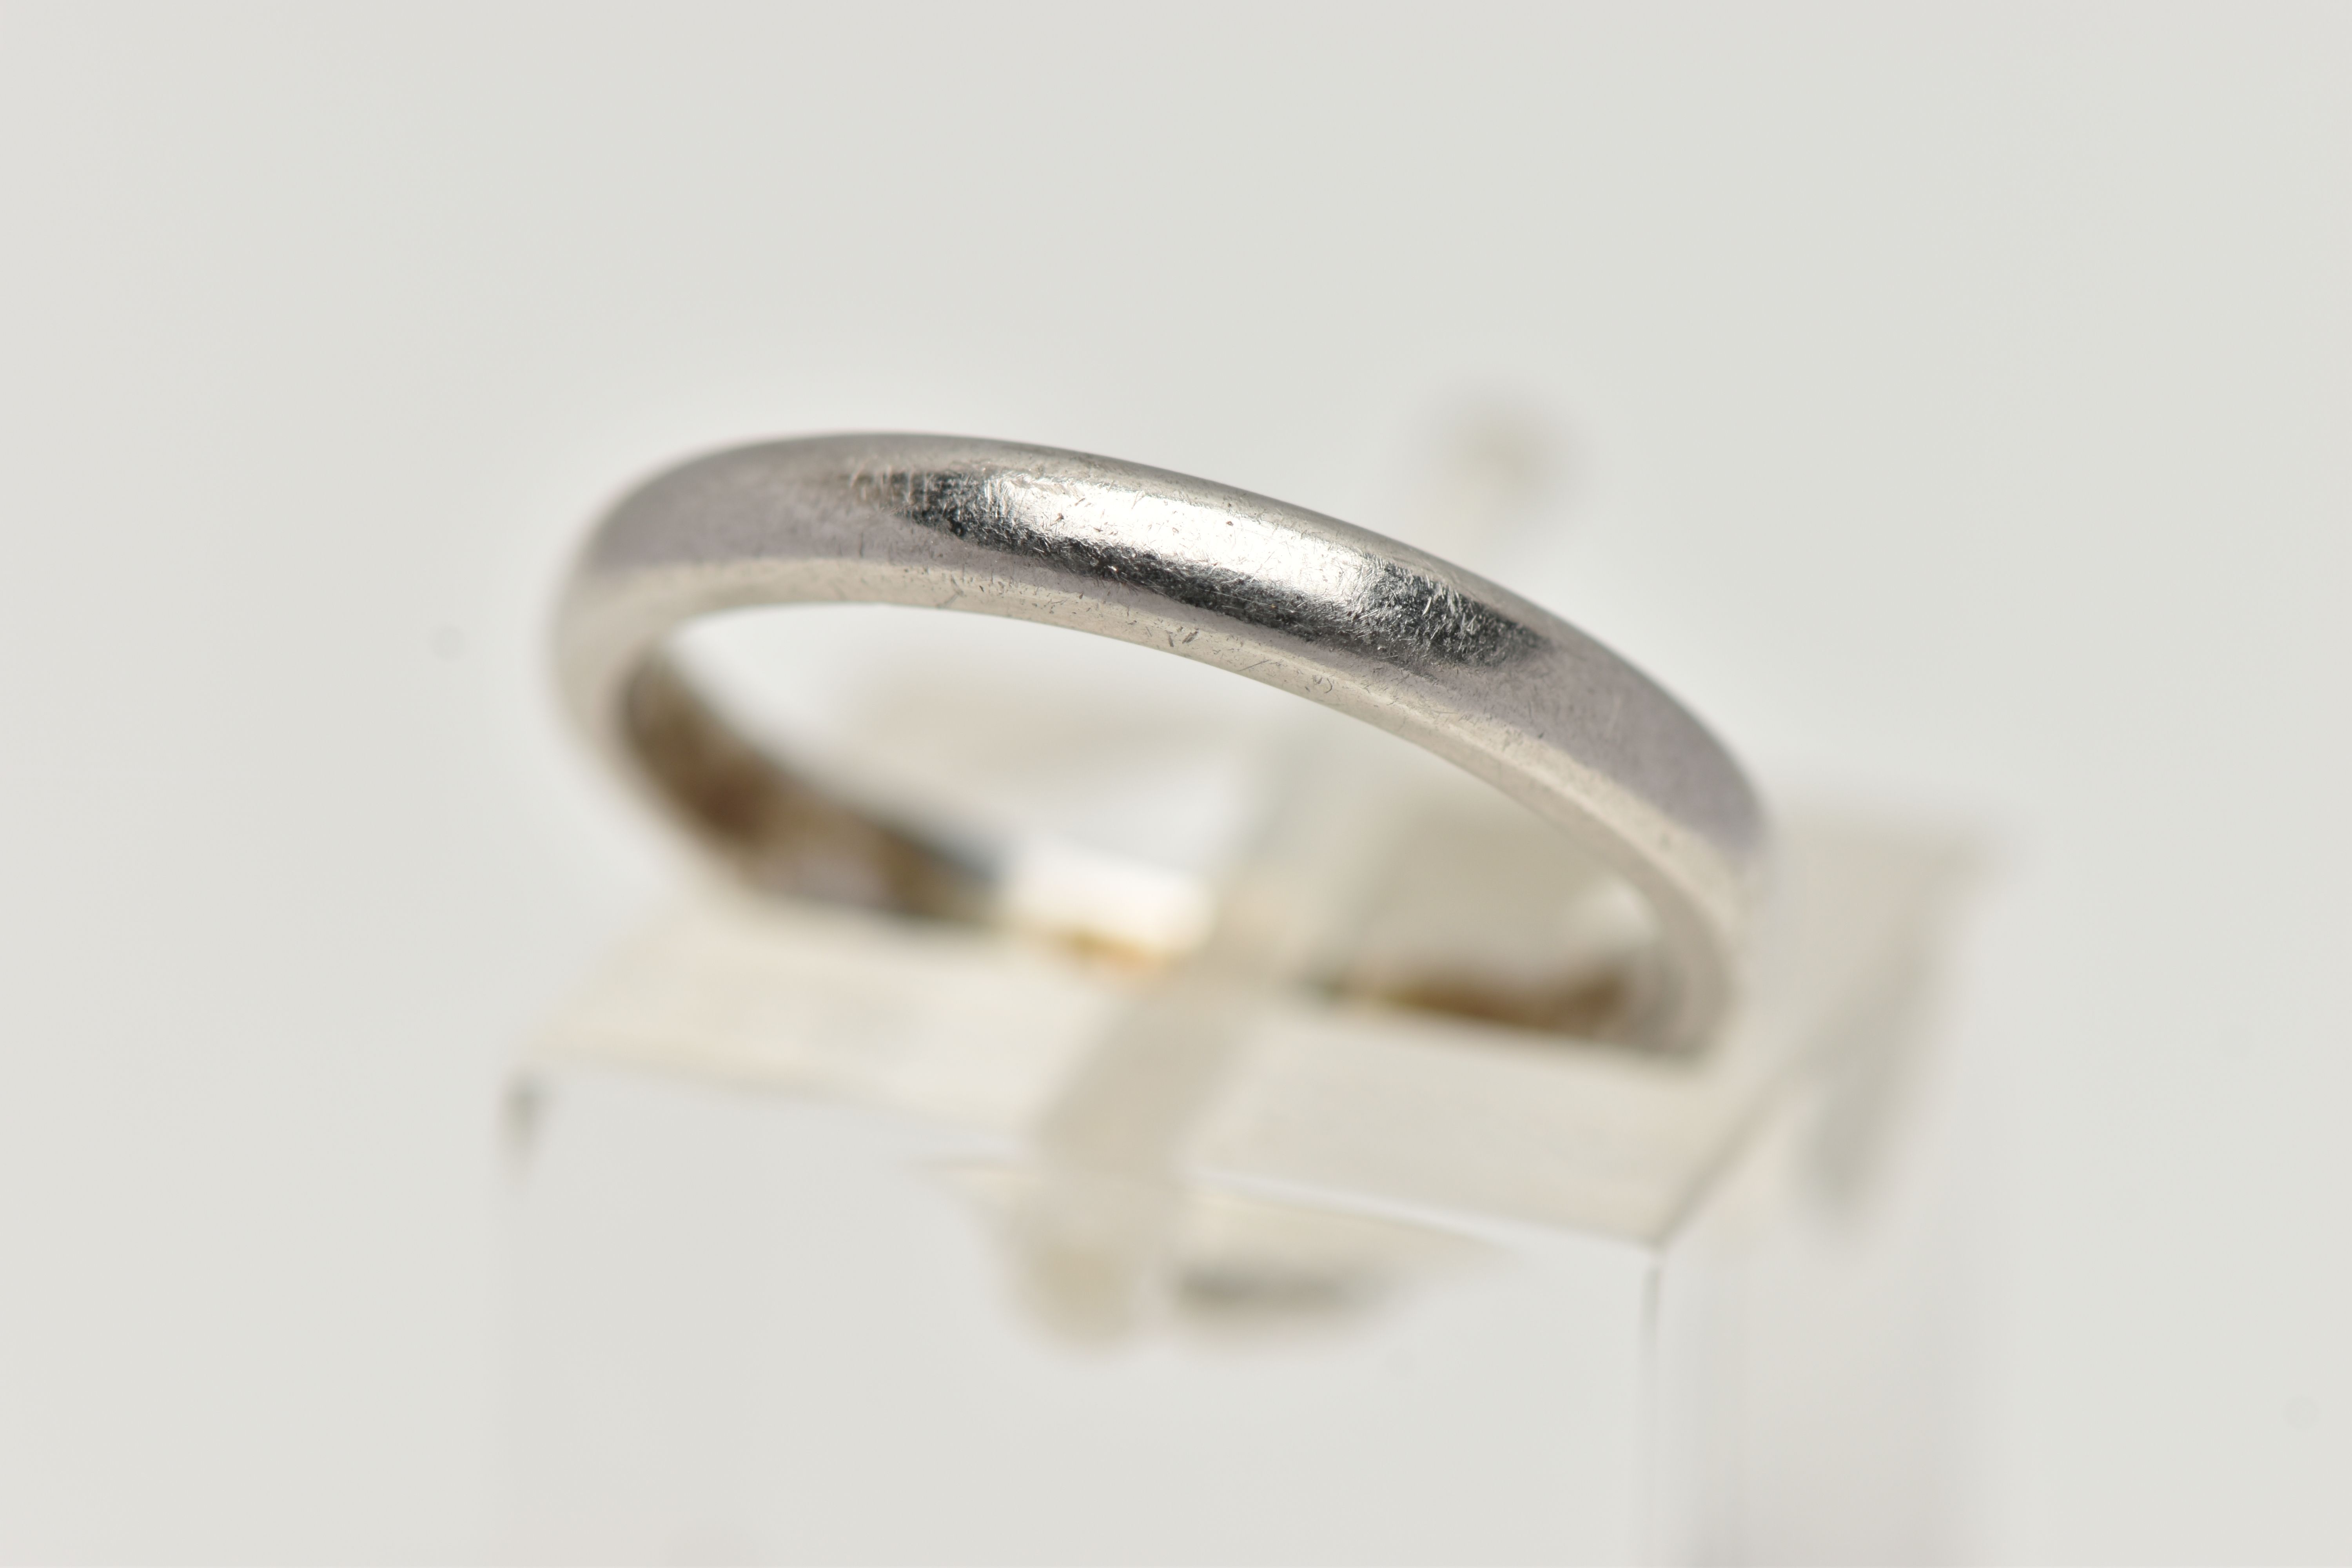 A POLISHED WHITE METAL BAND RING, unmarked band, ring size K, approximate gross weight 3.9 grams (